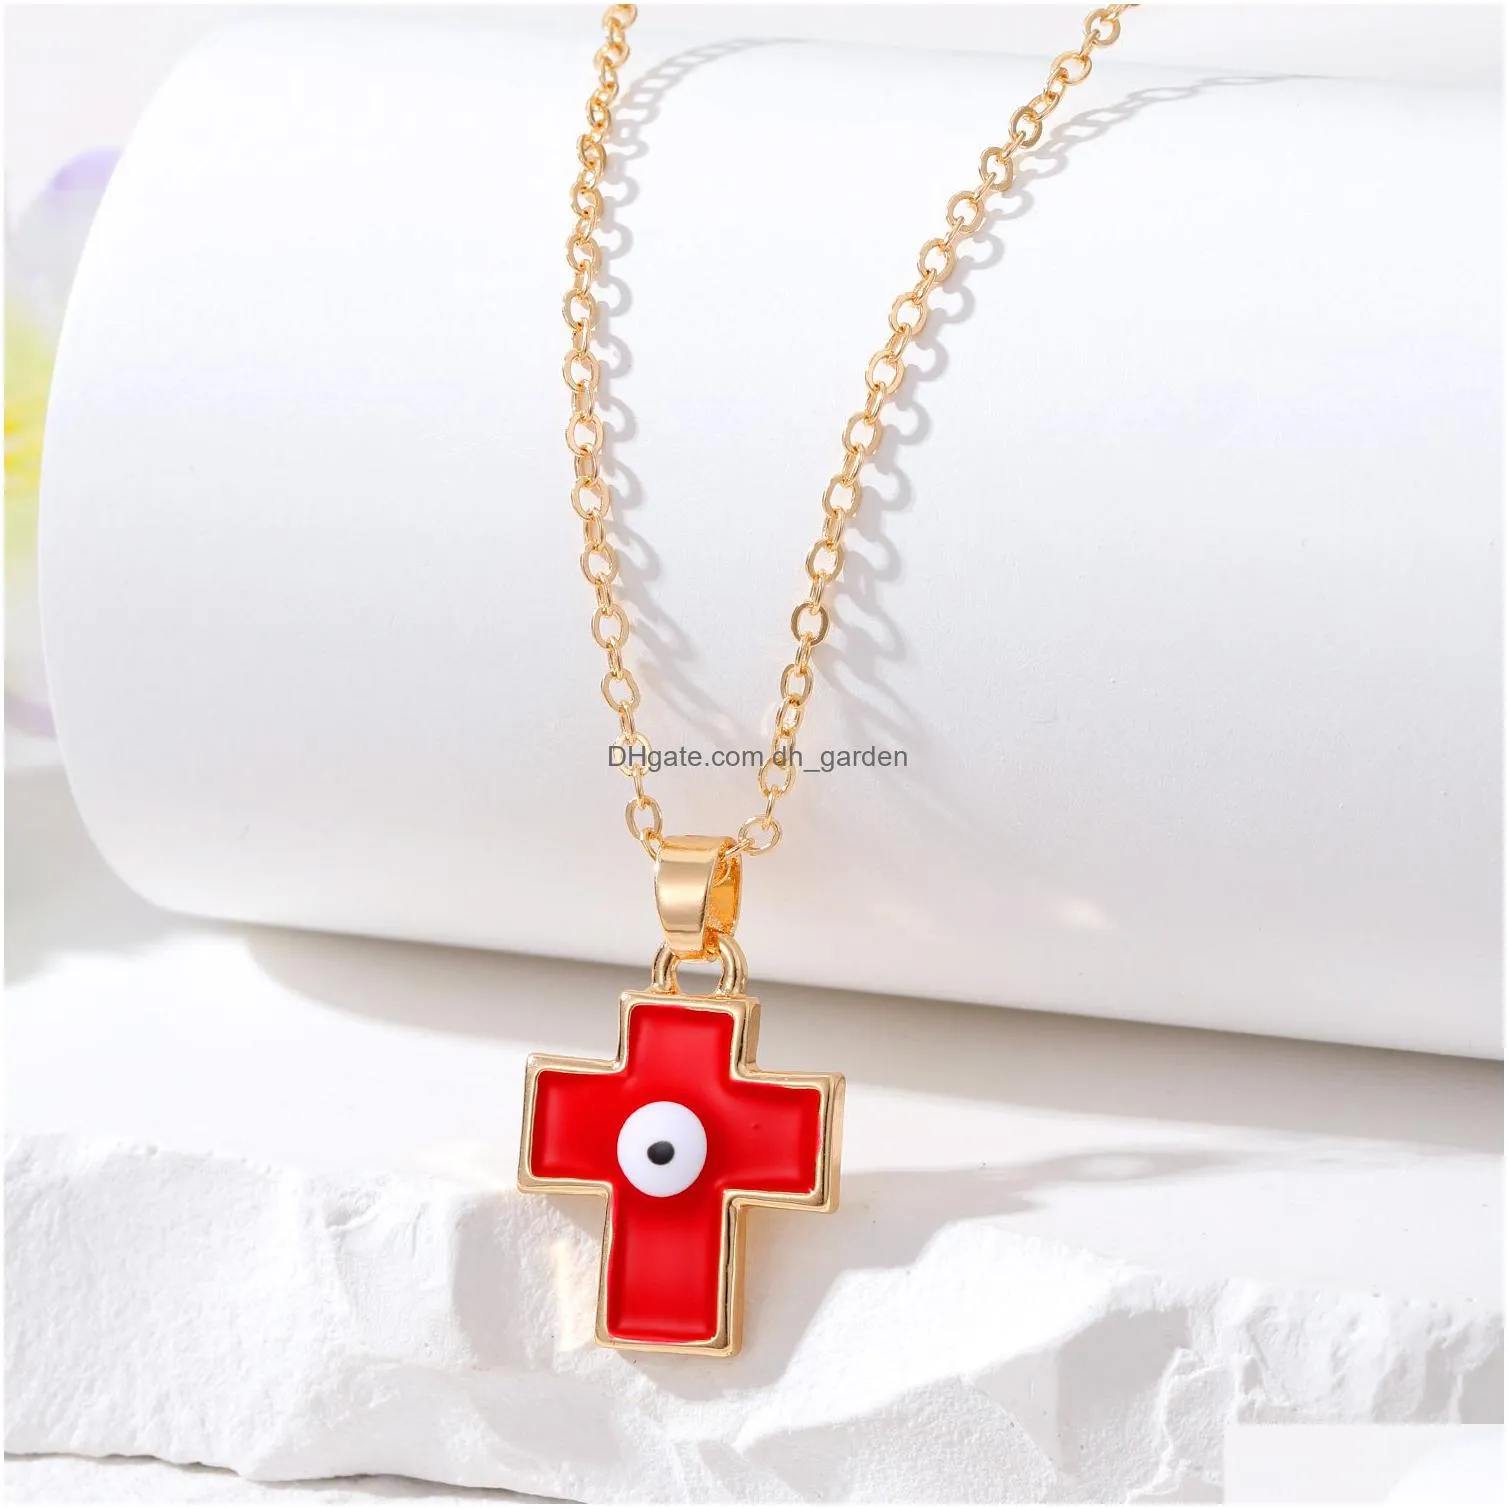 colorful turkish blue evil eye cross pendant necklace for women new trendy lucky eye clavicle chain choker wedding jewelry